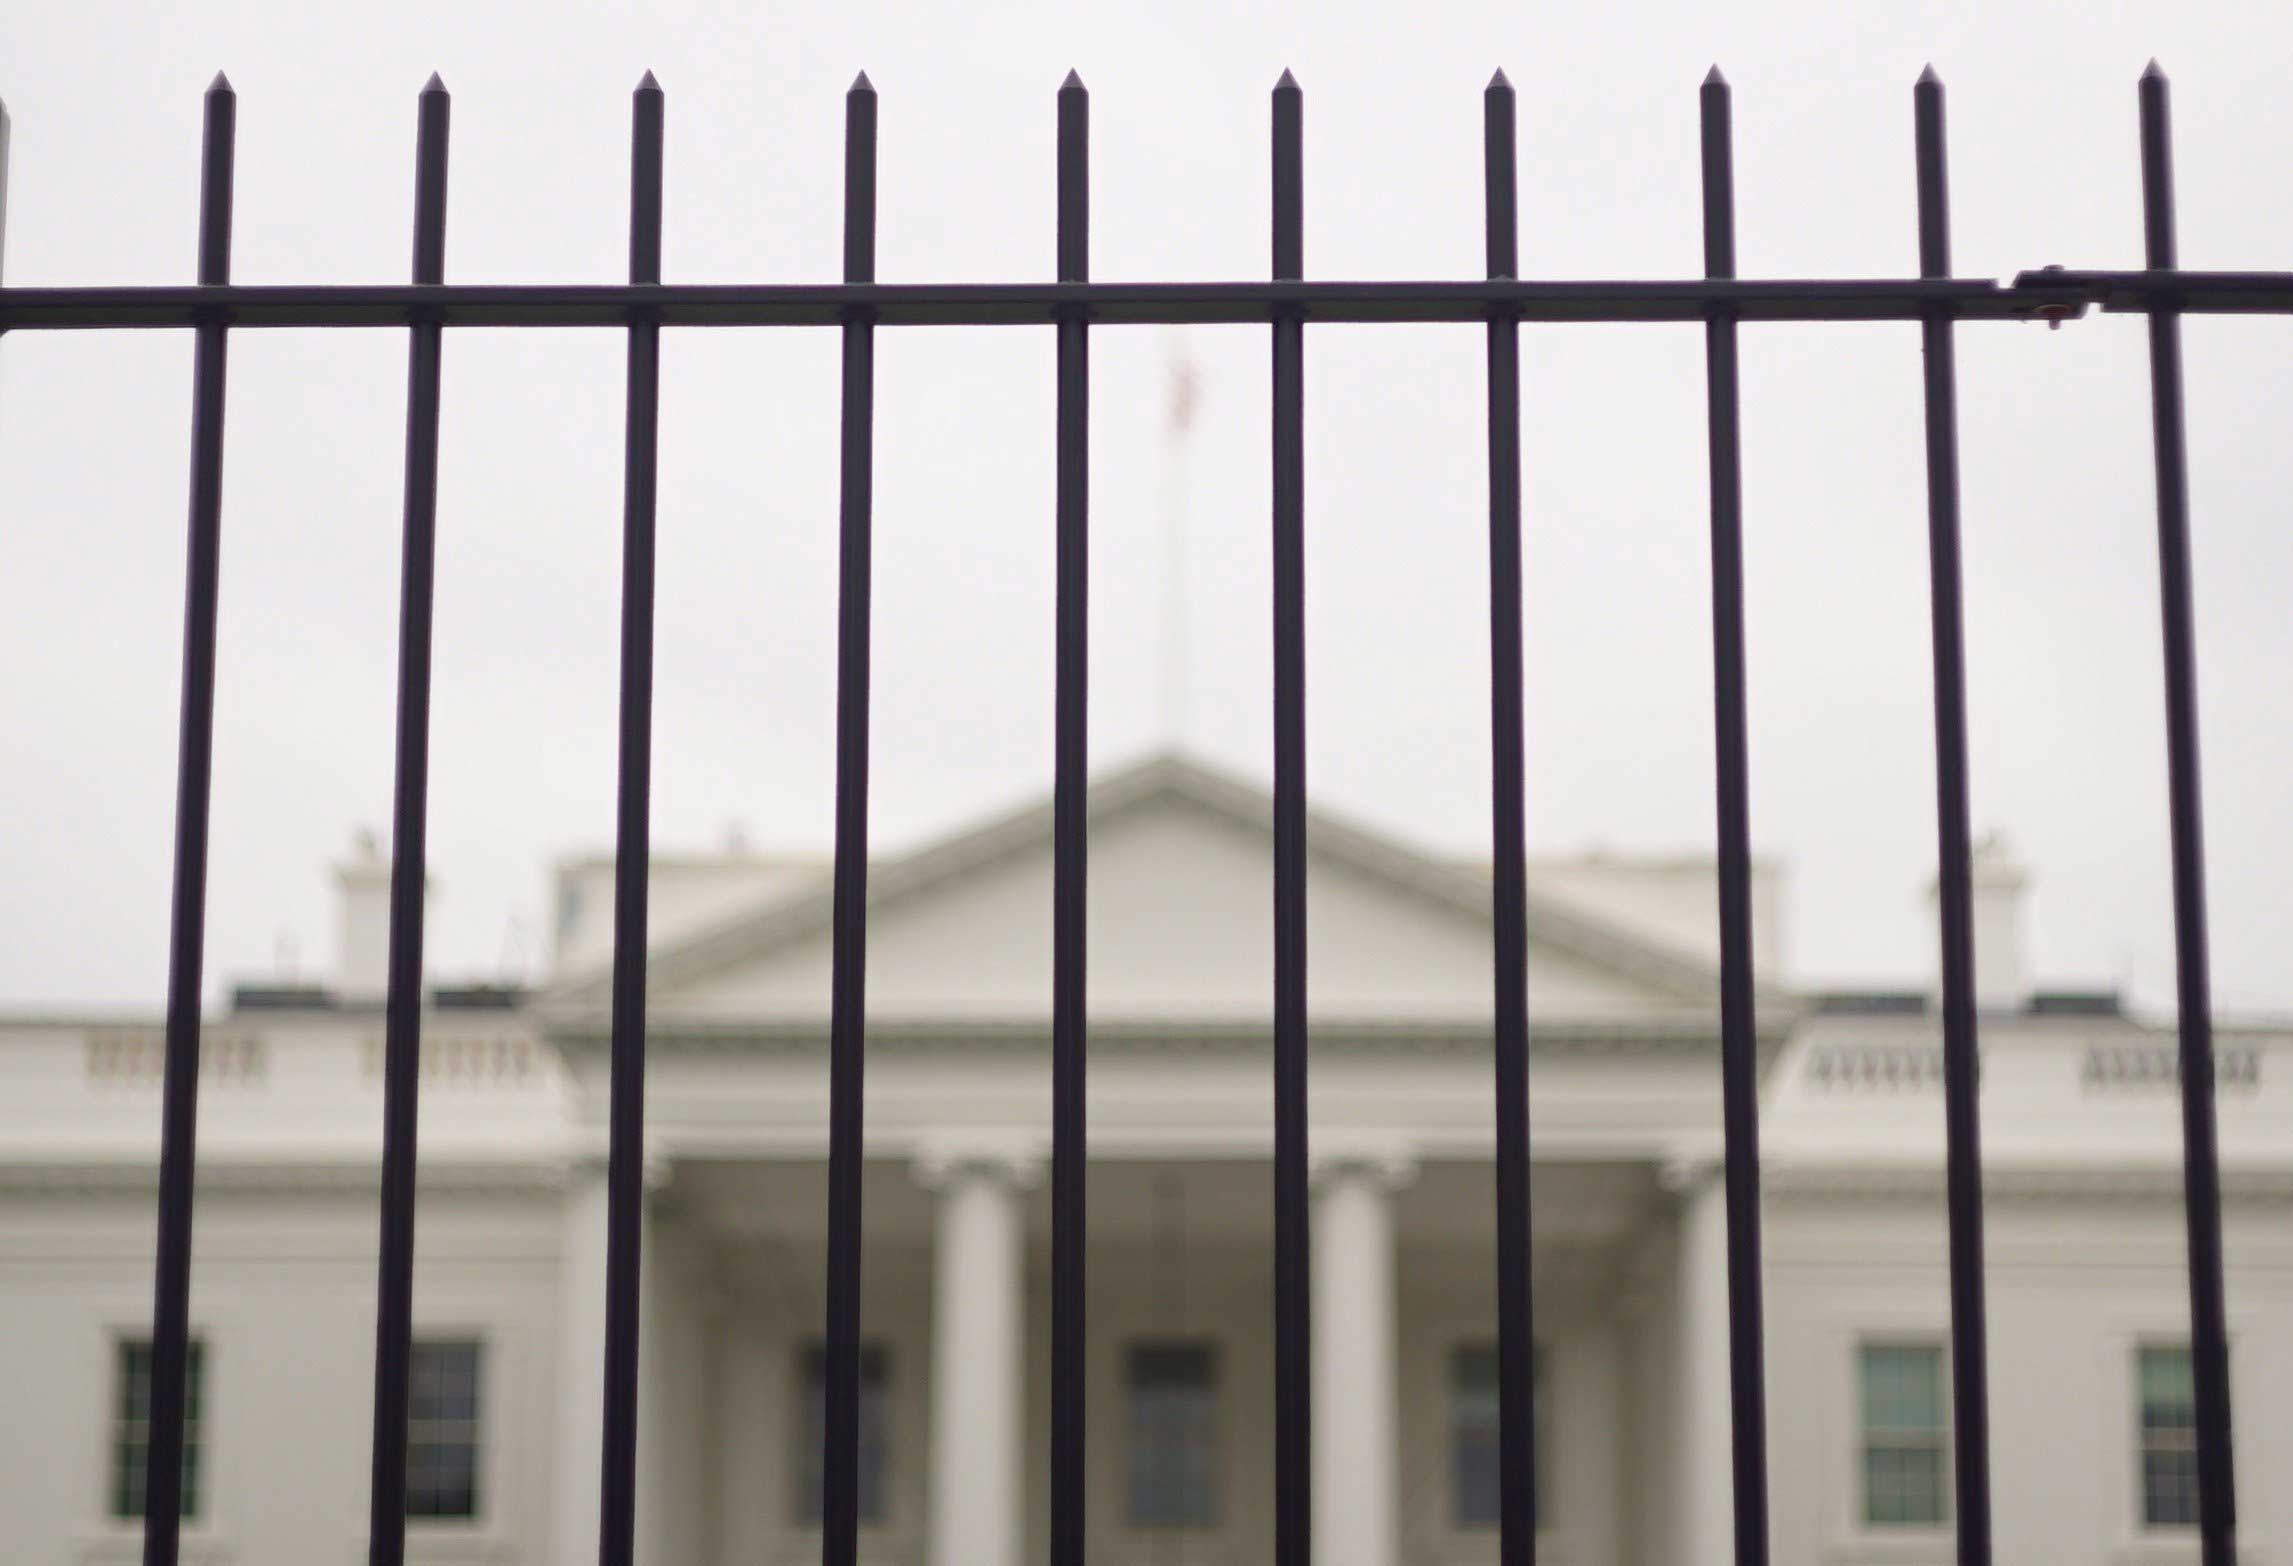 The White House is seen behind a fence on Oct. 3, 2014 in Washington. (Mandel Ngan—AFP/Getty Images)